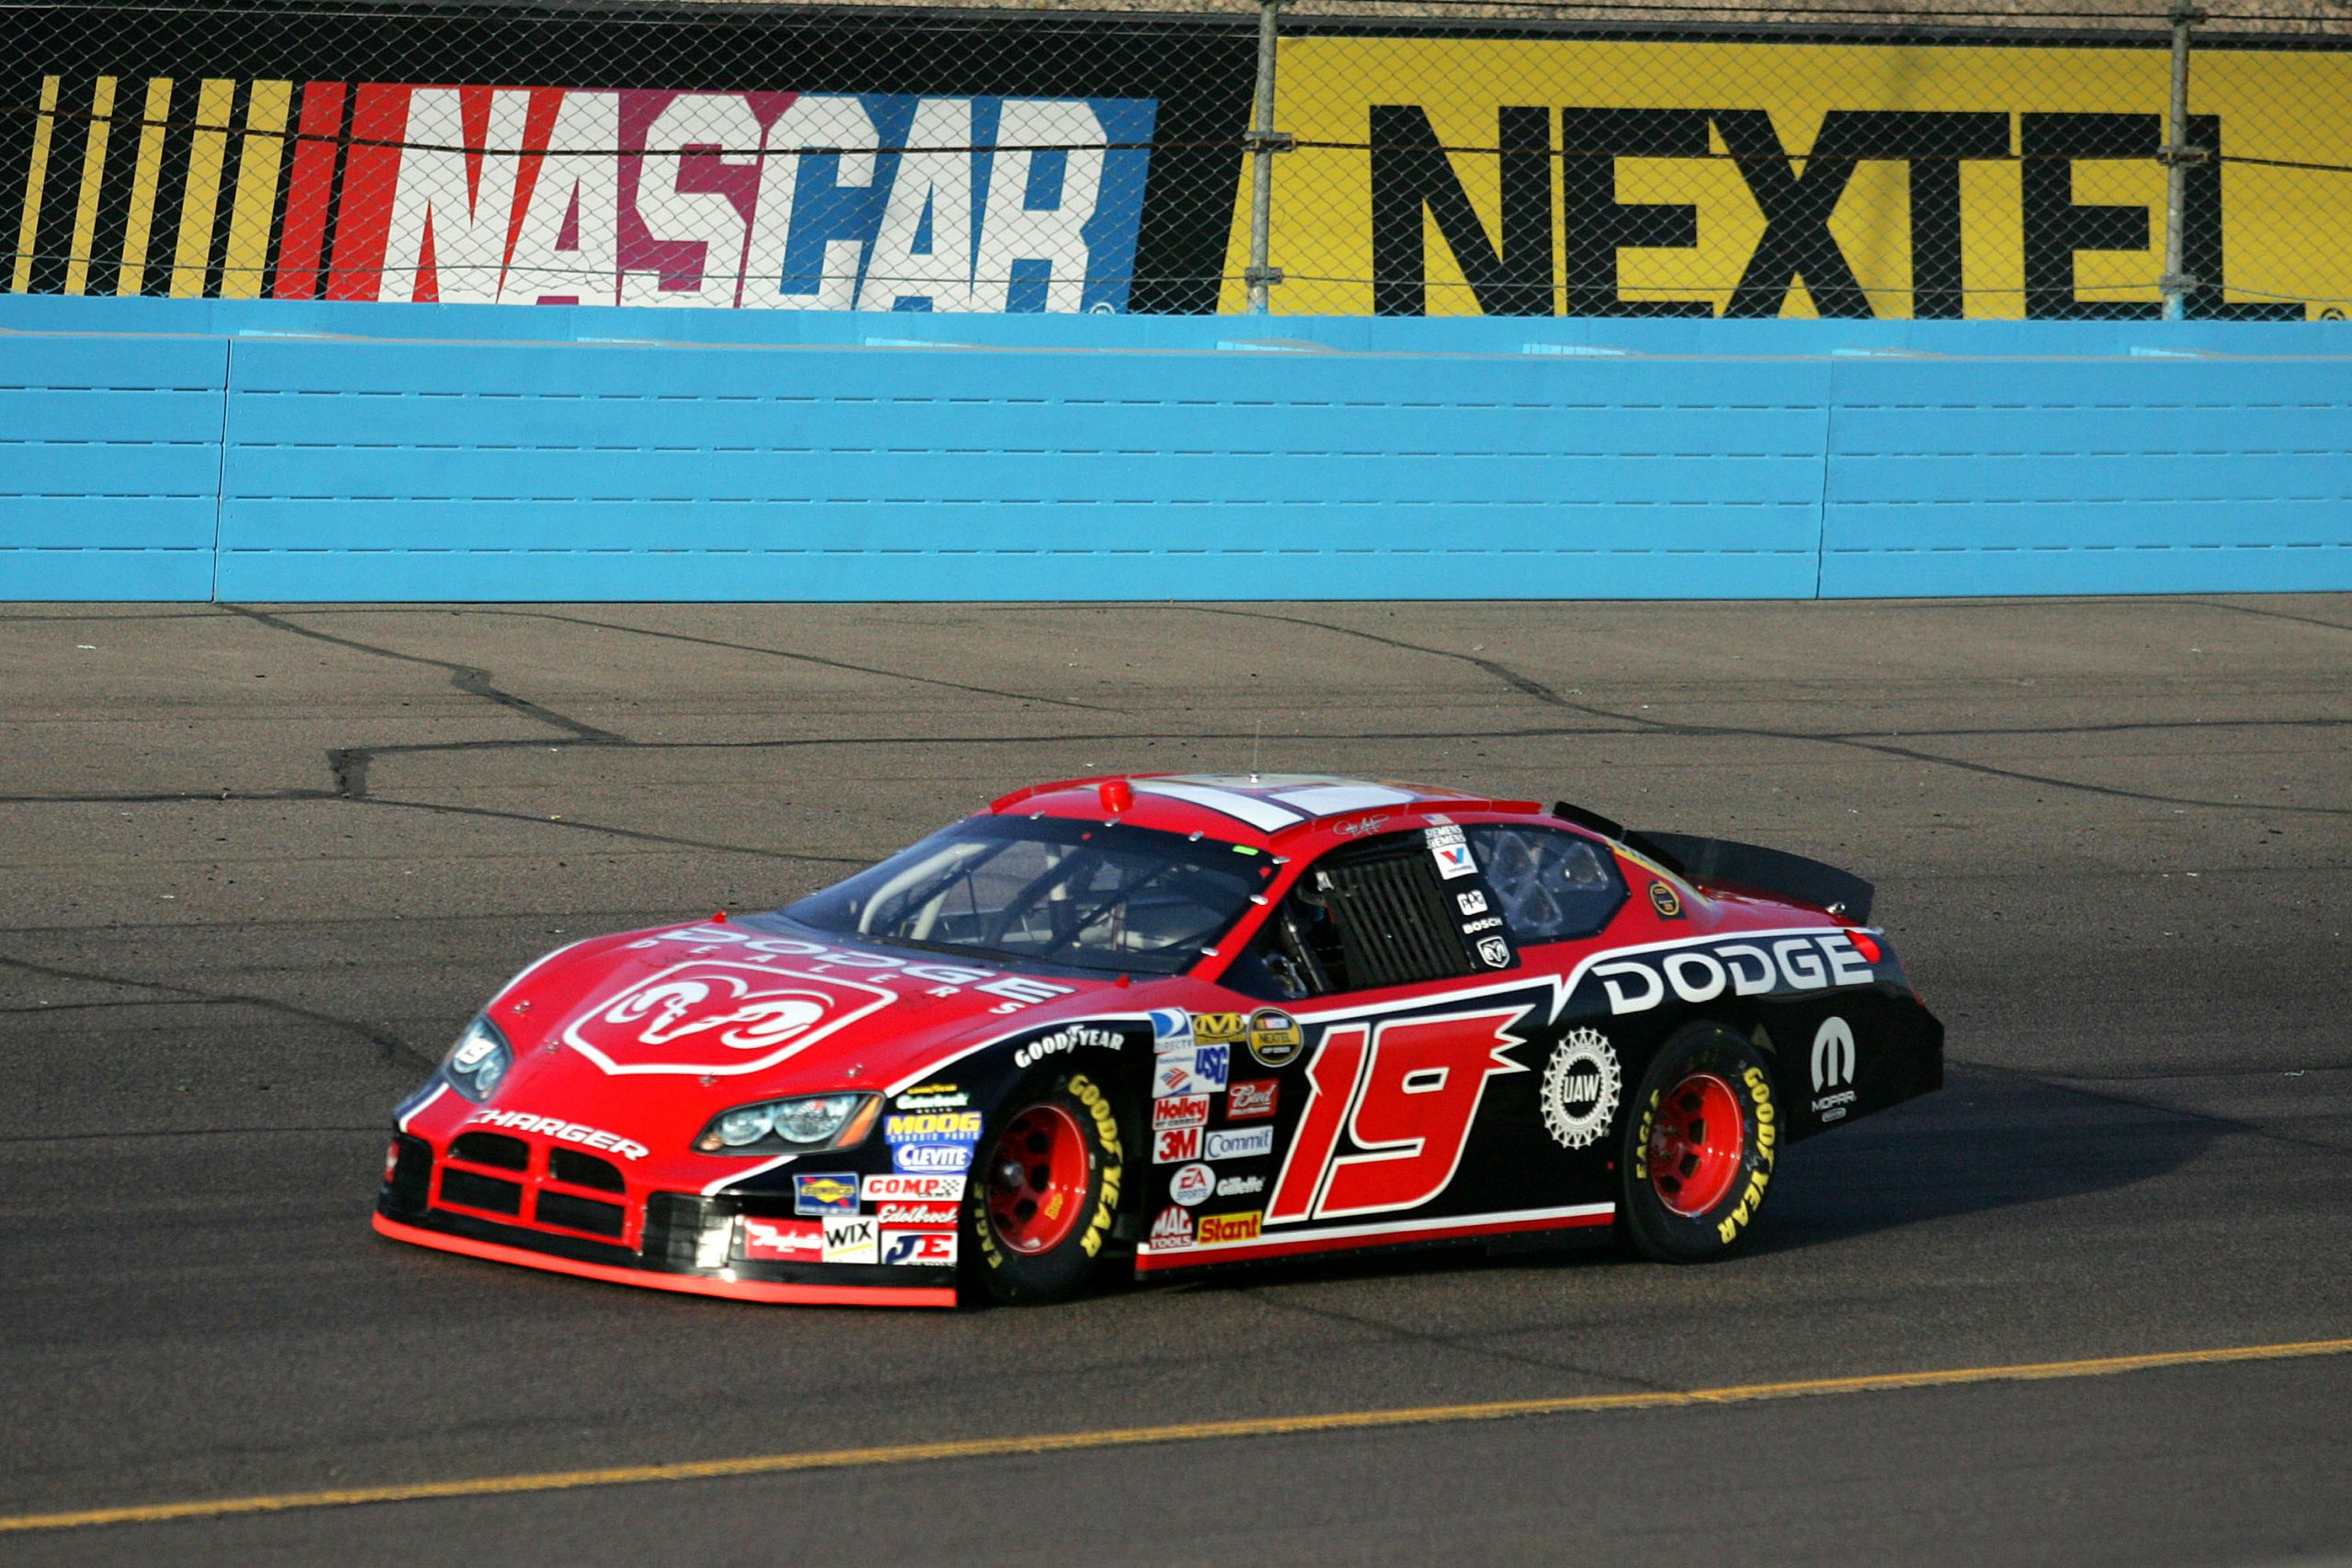 Jeremy Mayfield in the No. 19 car.